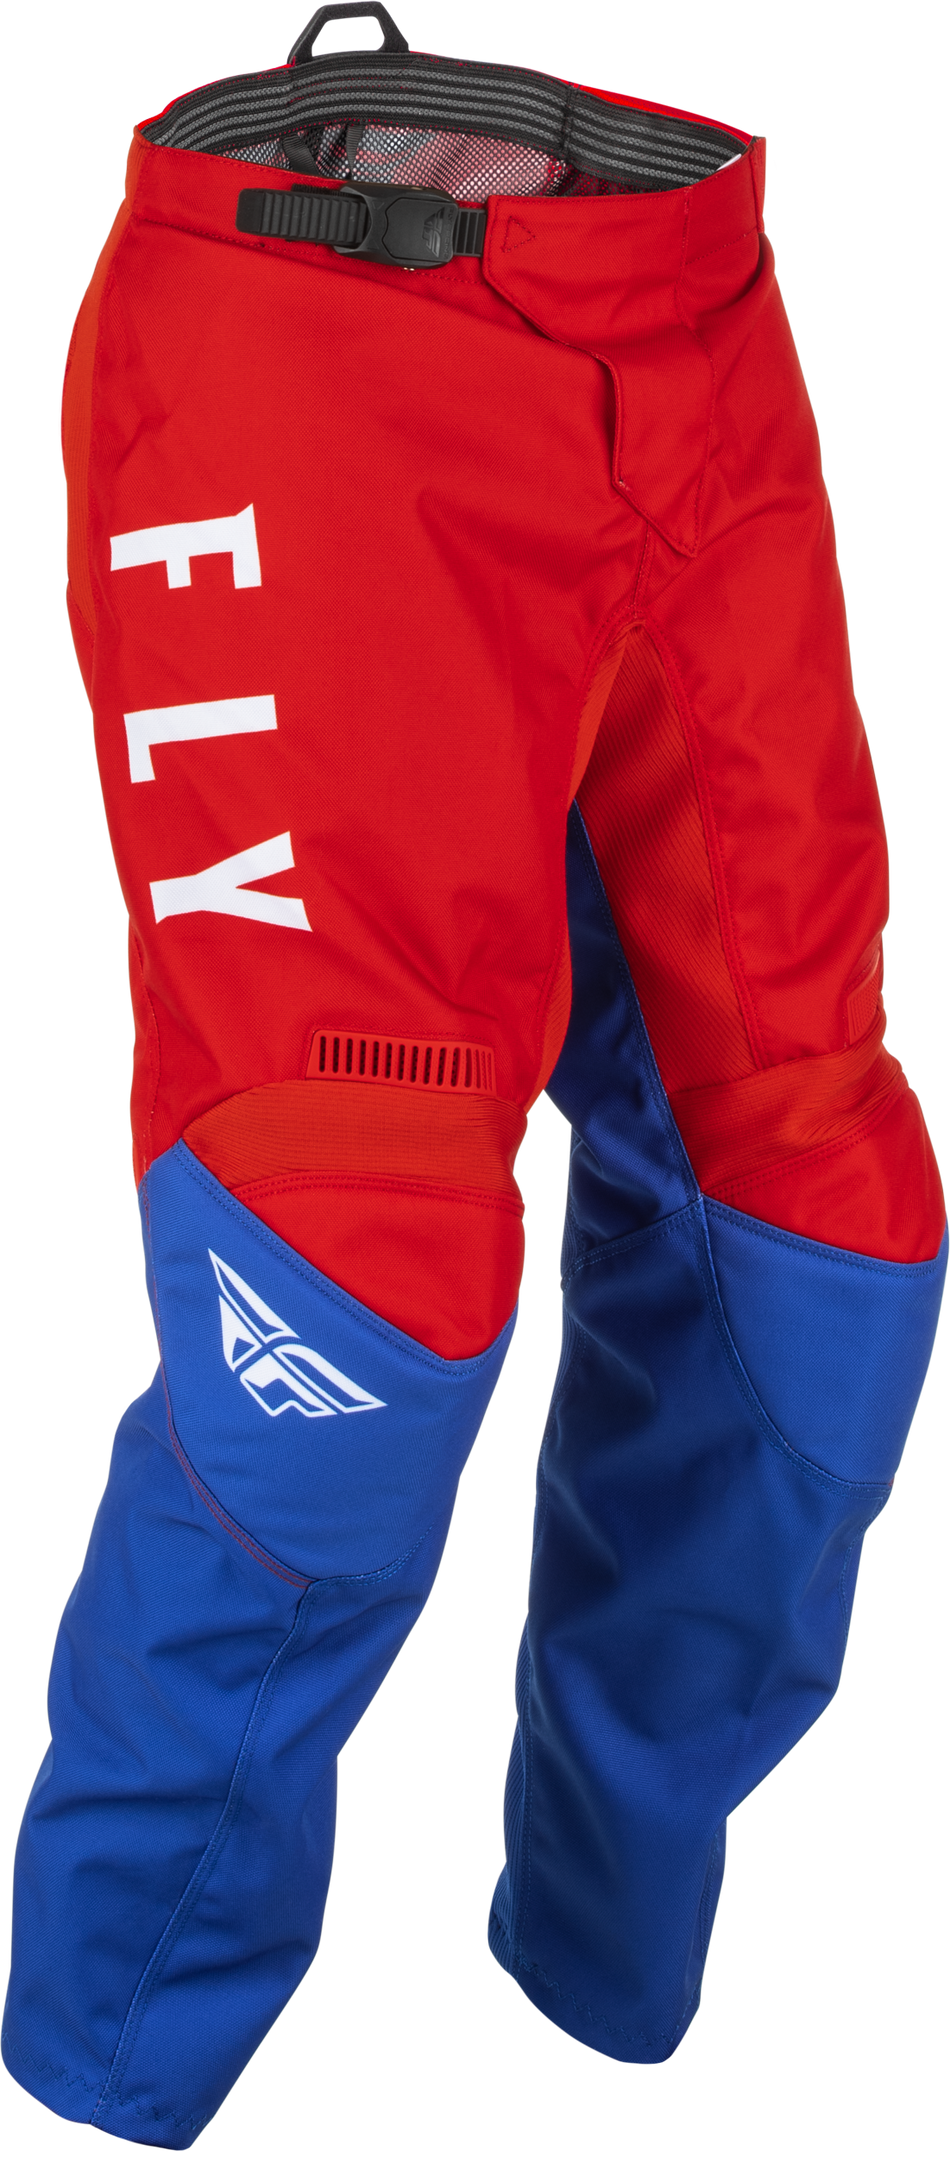 FLY RACING Youth F-16 Pants Red/White/Blue Sz 24 375-93424